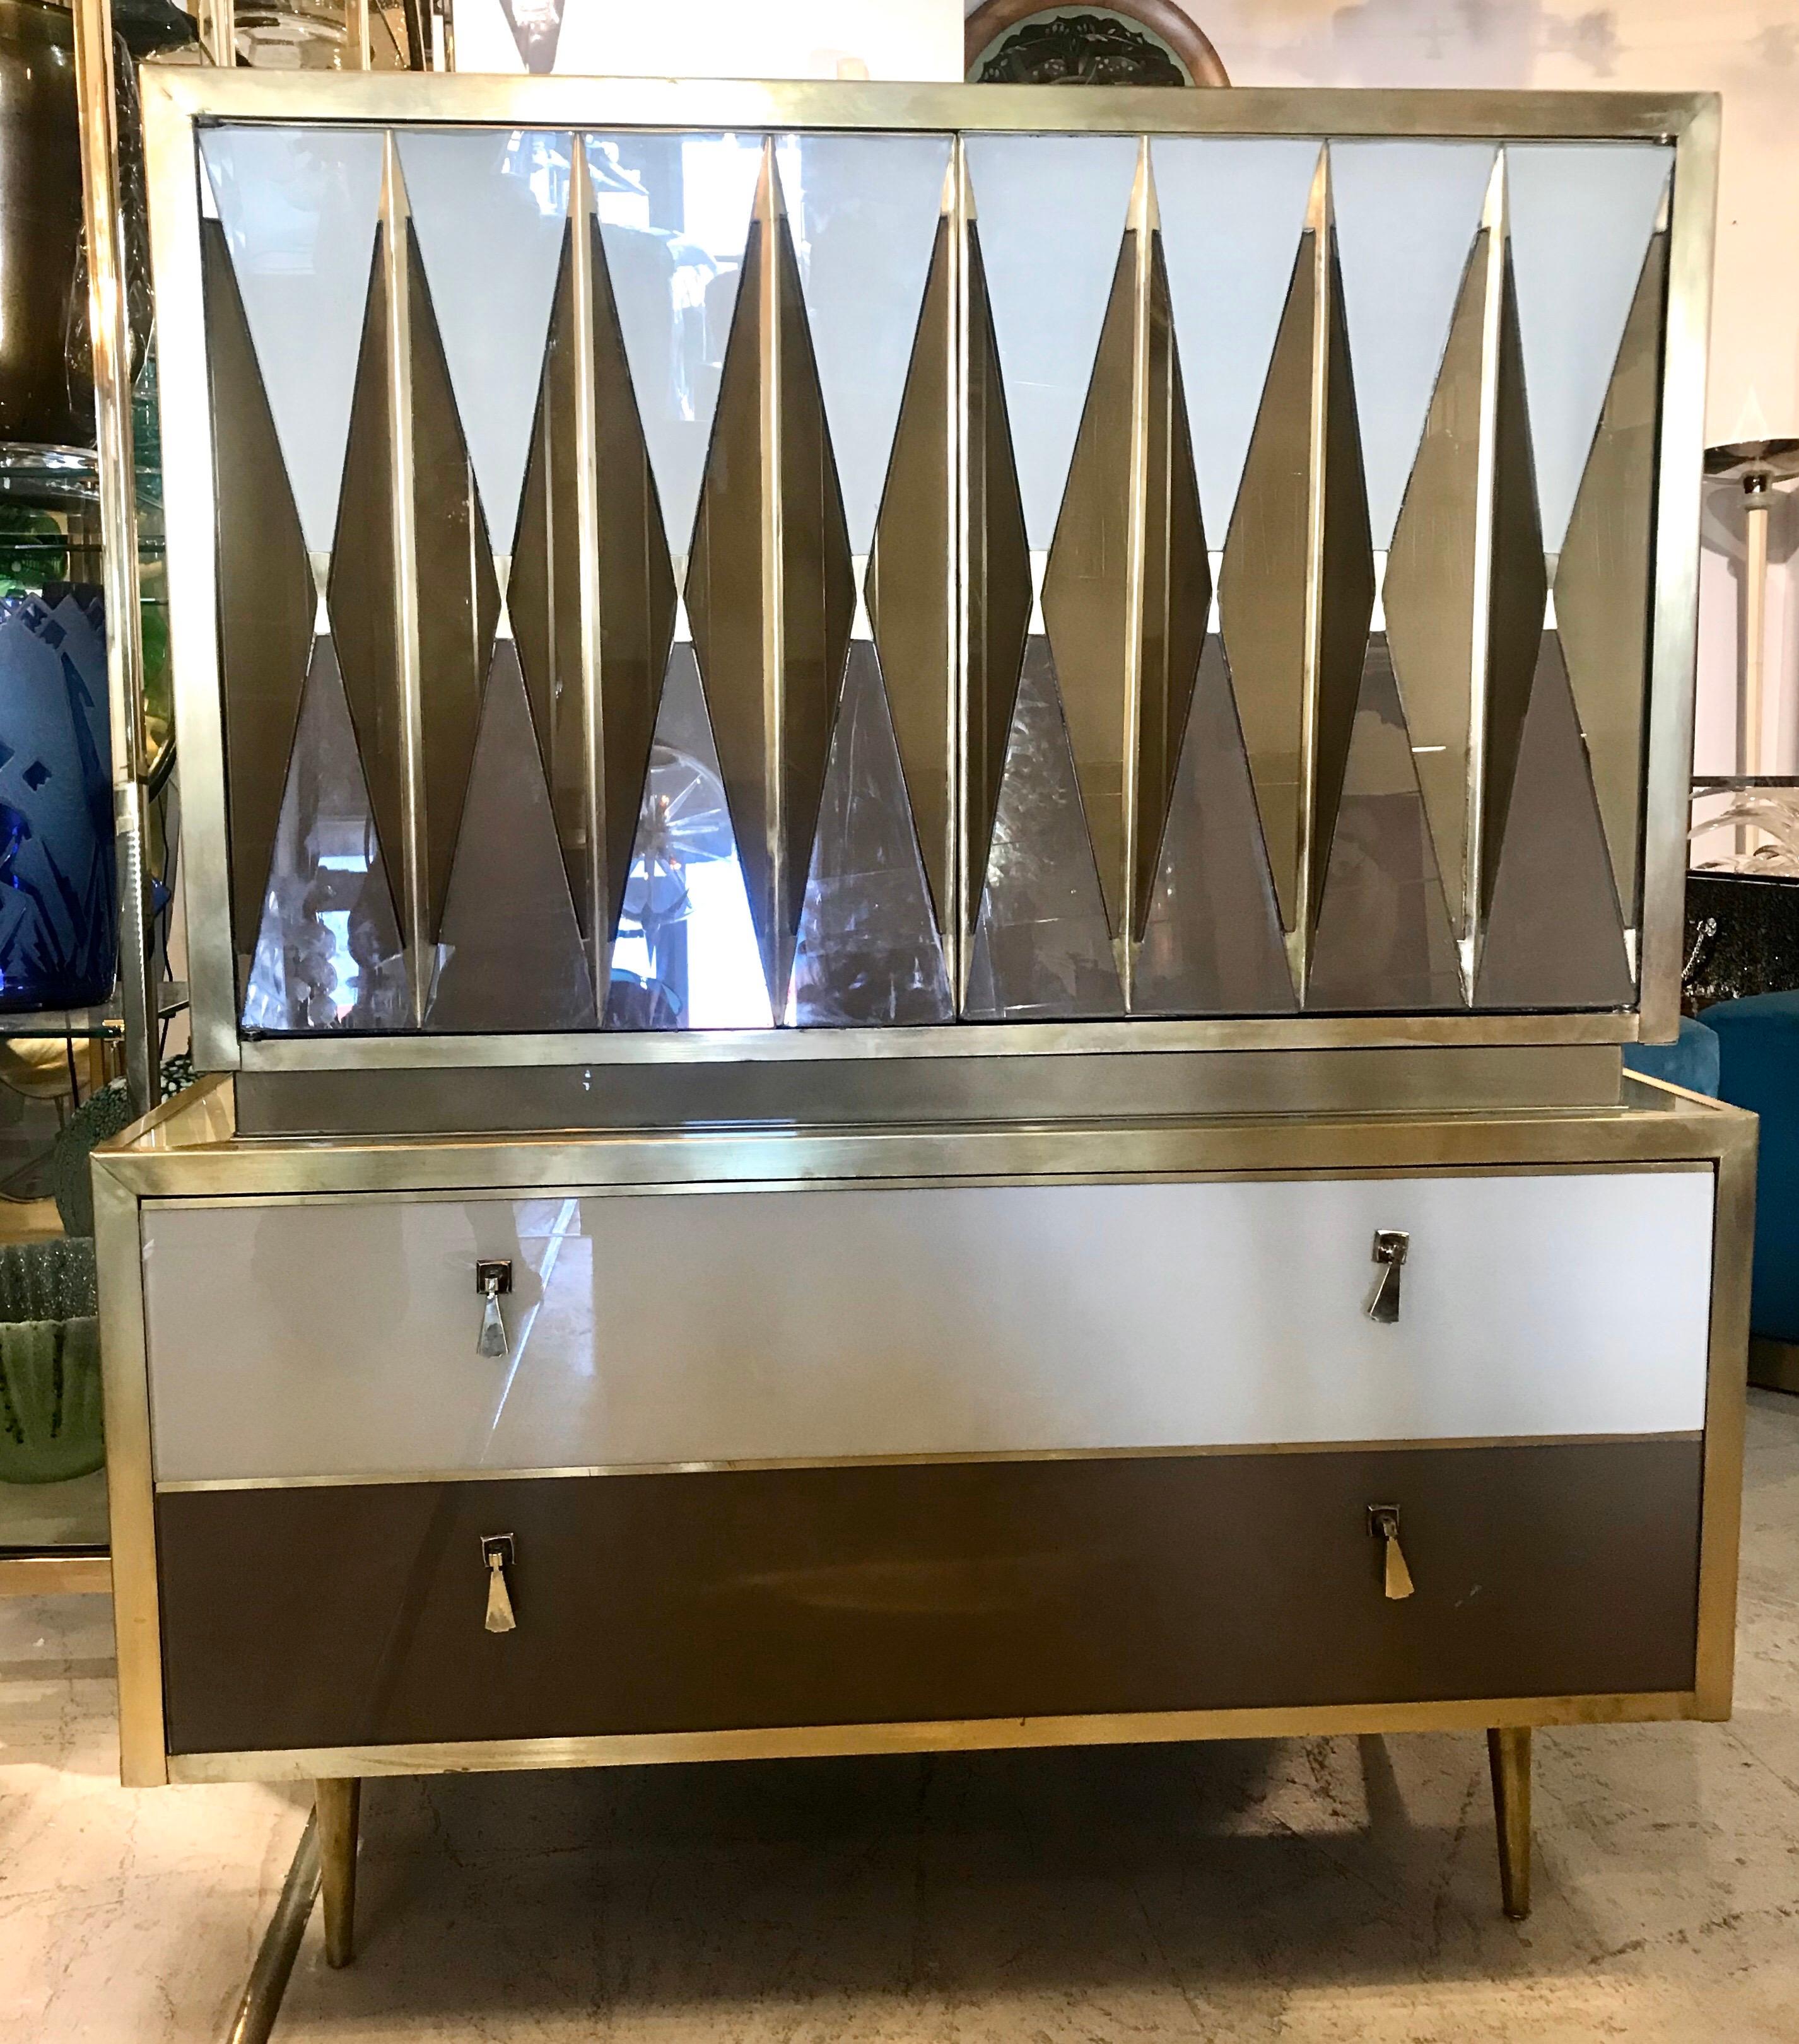 One of a kind, custom made Italian chest of drawers of glass and brass. This highly decorative piece of furniture enhances any room it's placed in.